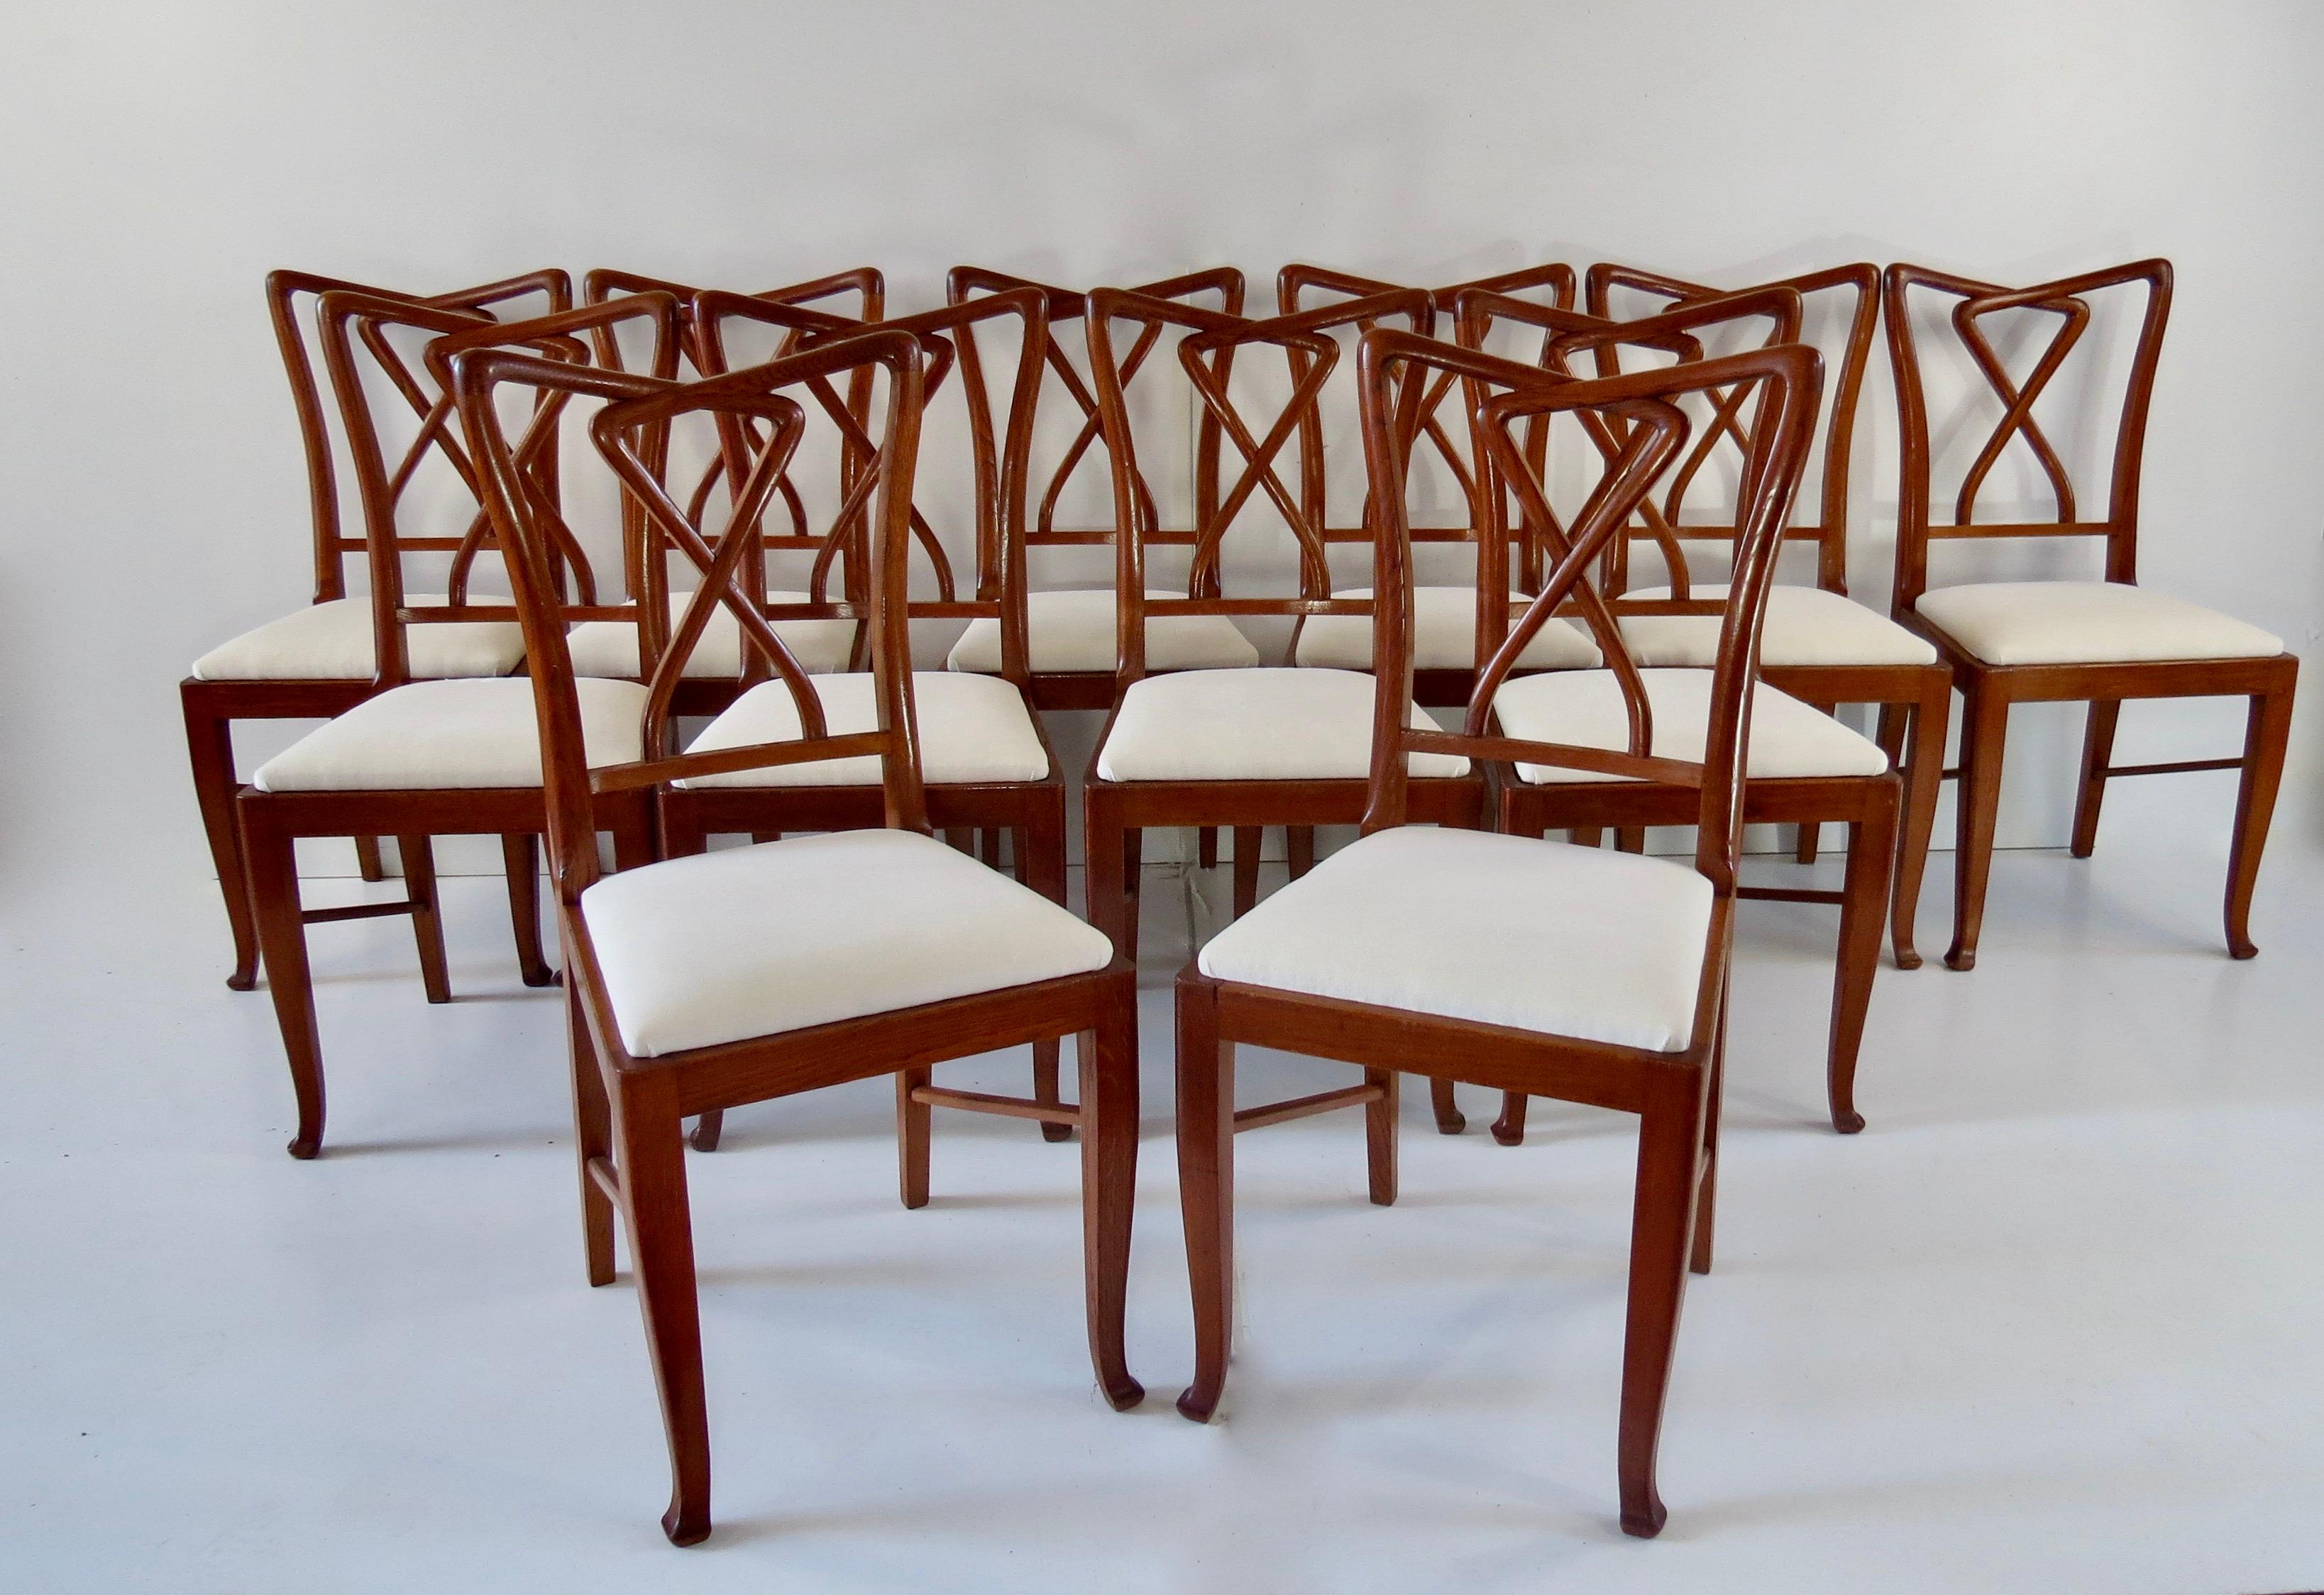 Exceptional set of 12 walnut dining chairs attributed to Paolo Buffa, 1950.
very rare set of 12 chairs produced for a private residence in Milan
details typical for Buffa's craftsmanship include the bow shaped patterns on the backrests.
The